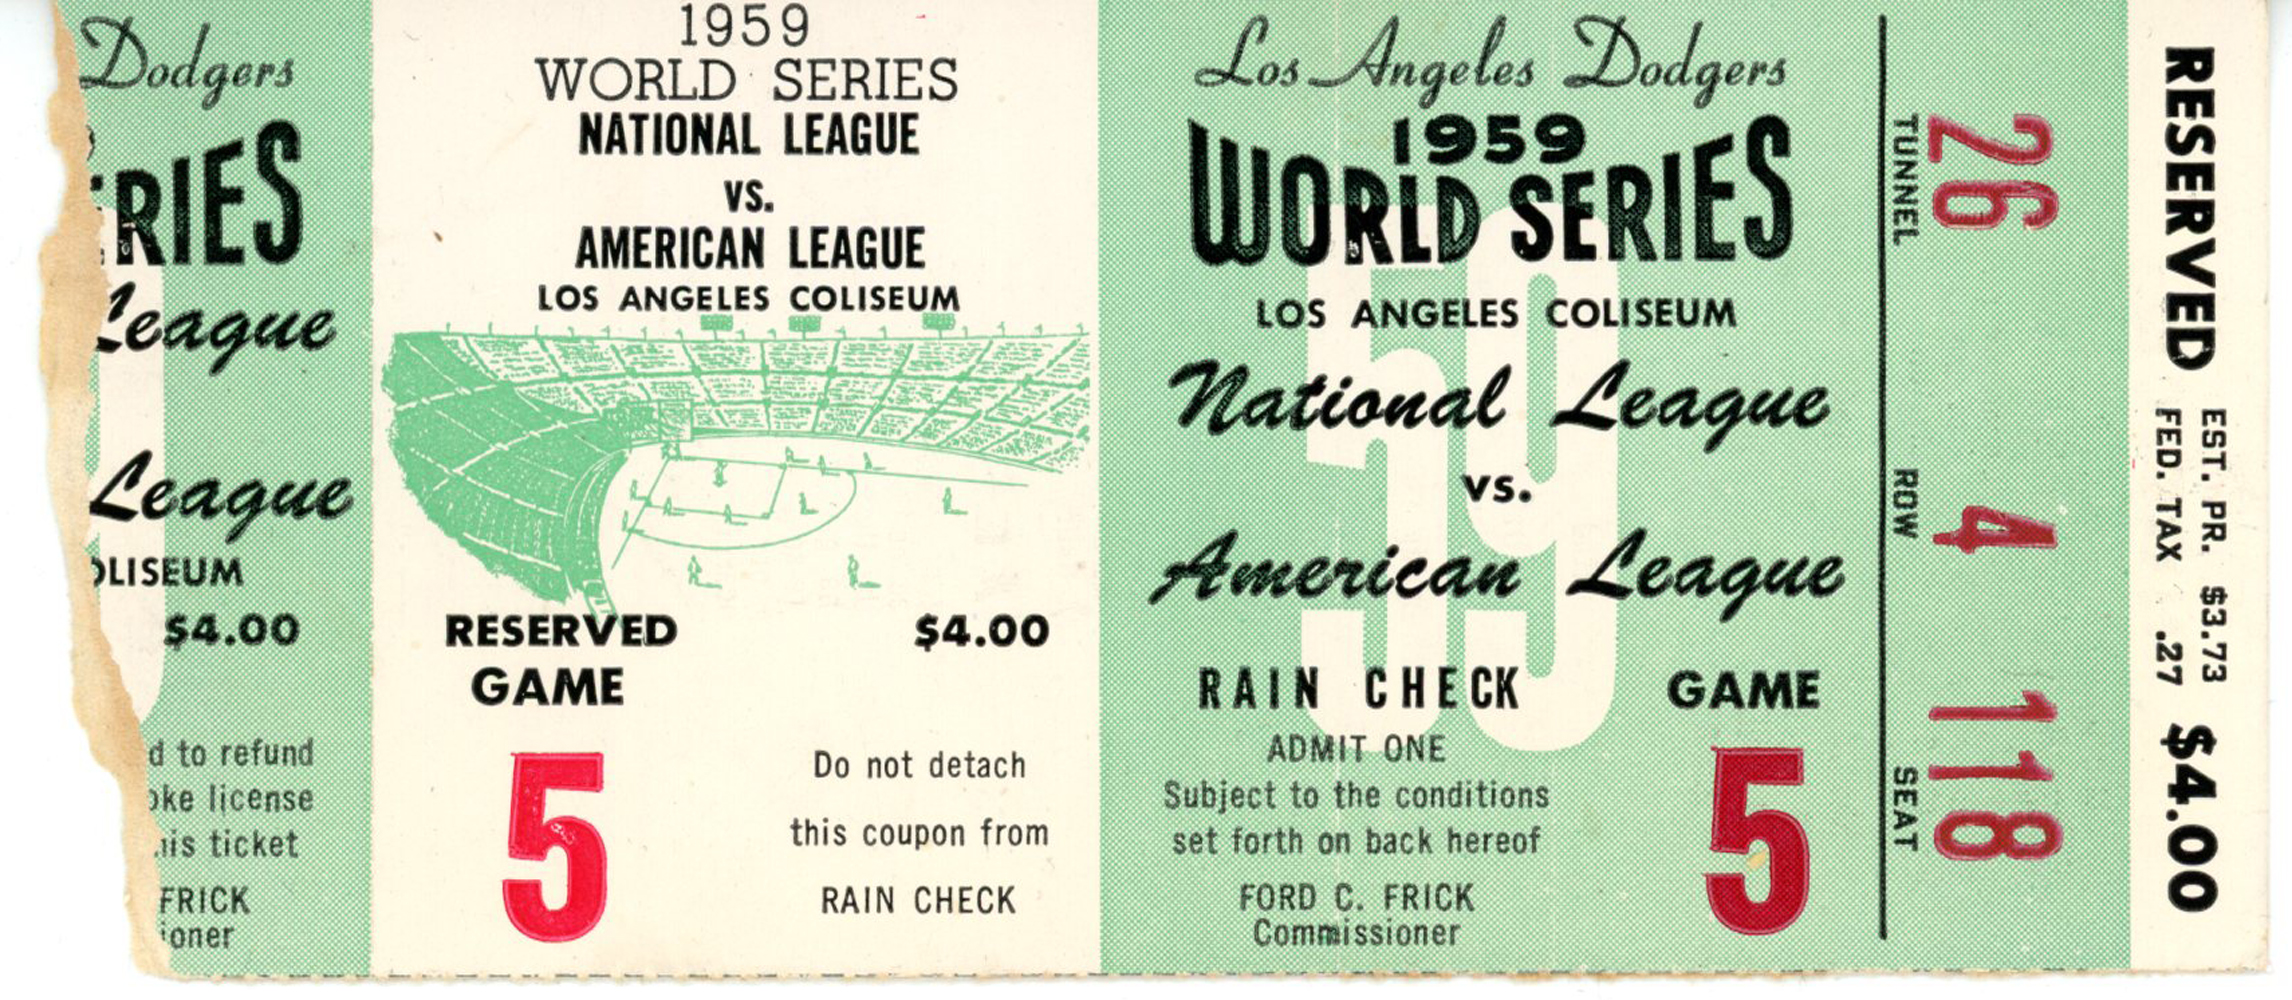 1959 World Series Game 5 Ticket Stub Los Angeles Dodgers vs White Sox